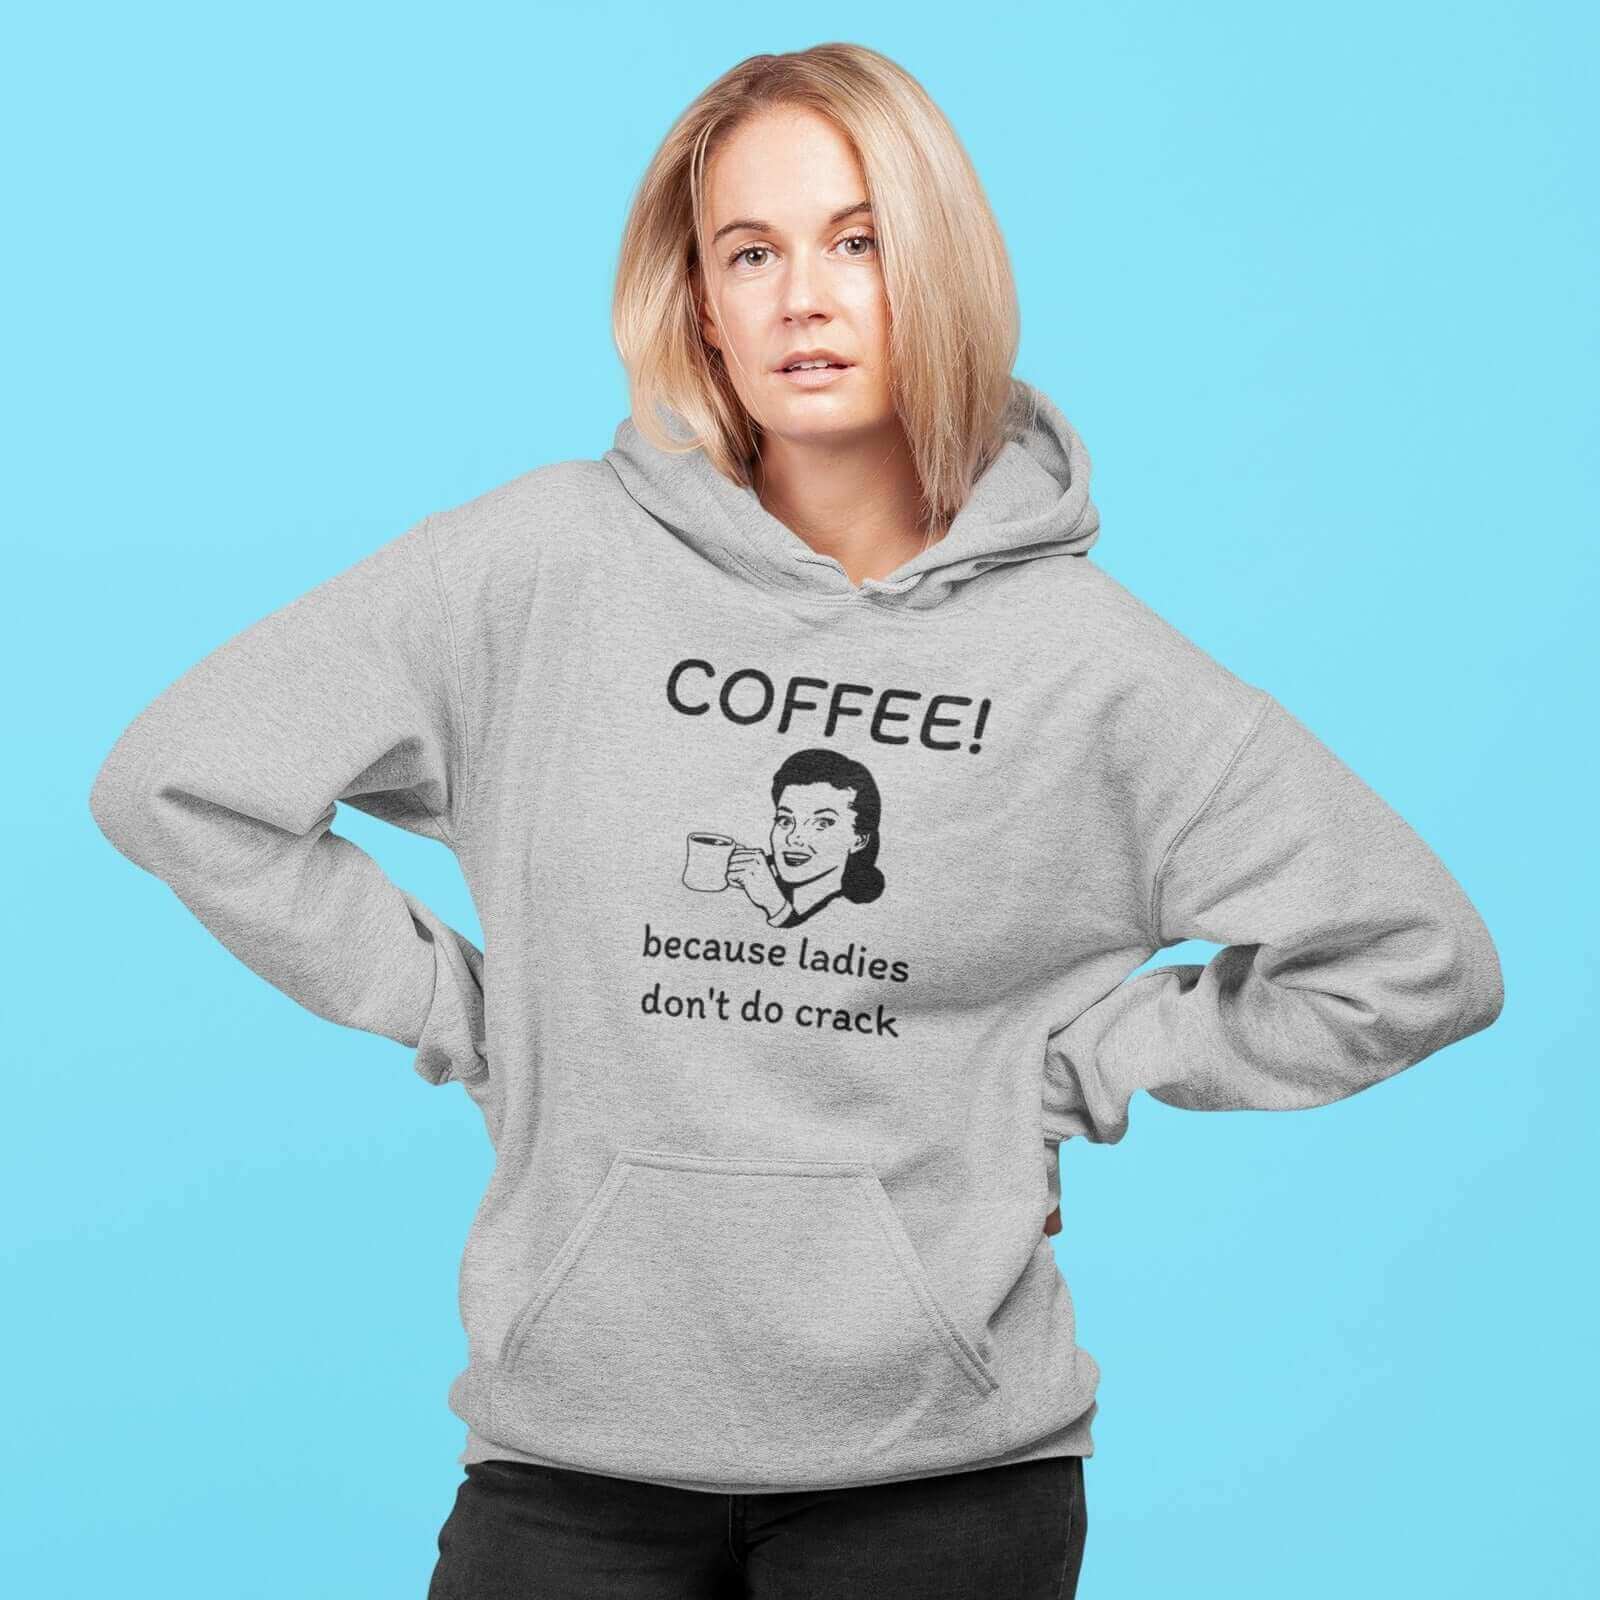 Woman wearing a light grey hoodie sweatshirt with an image of a retro woman holding a coffee mug with the phrase Coffee, because ladies don't do crack printed on the front.